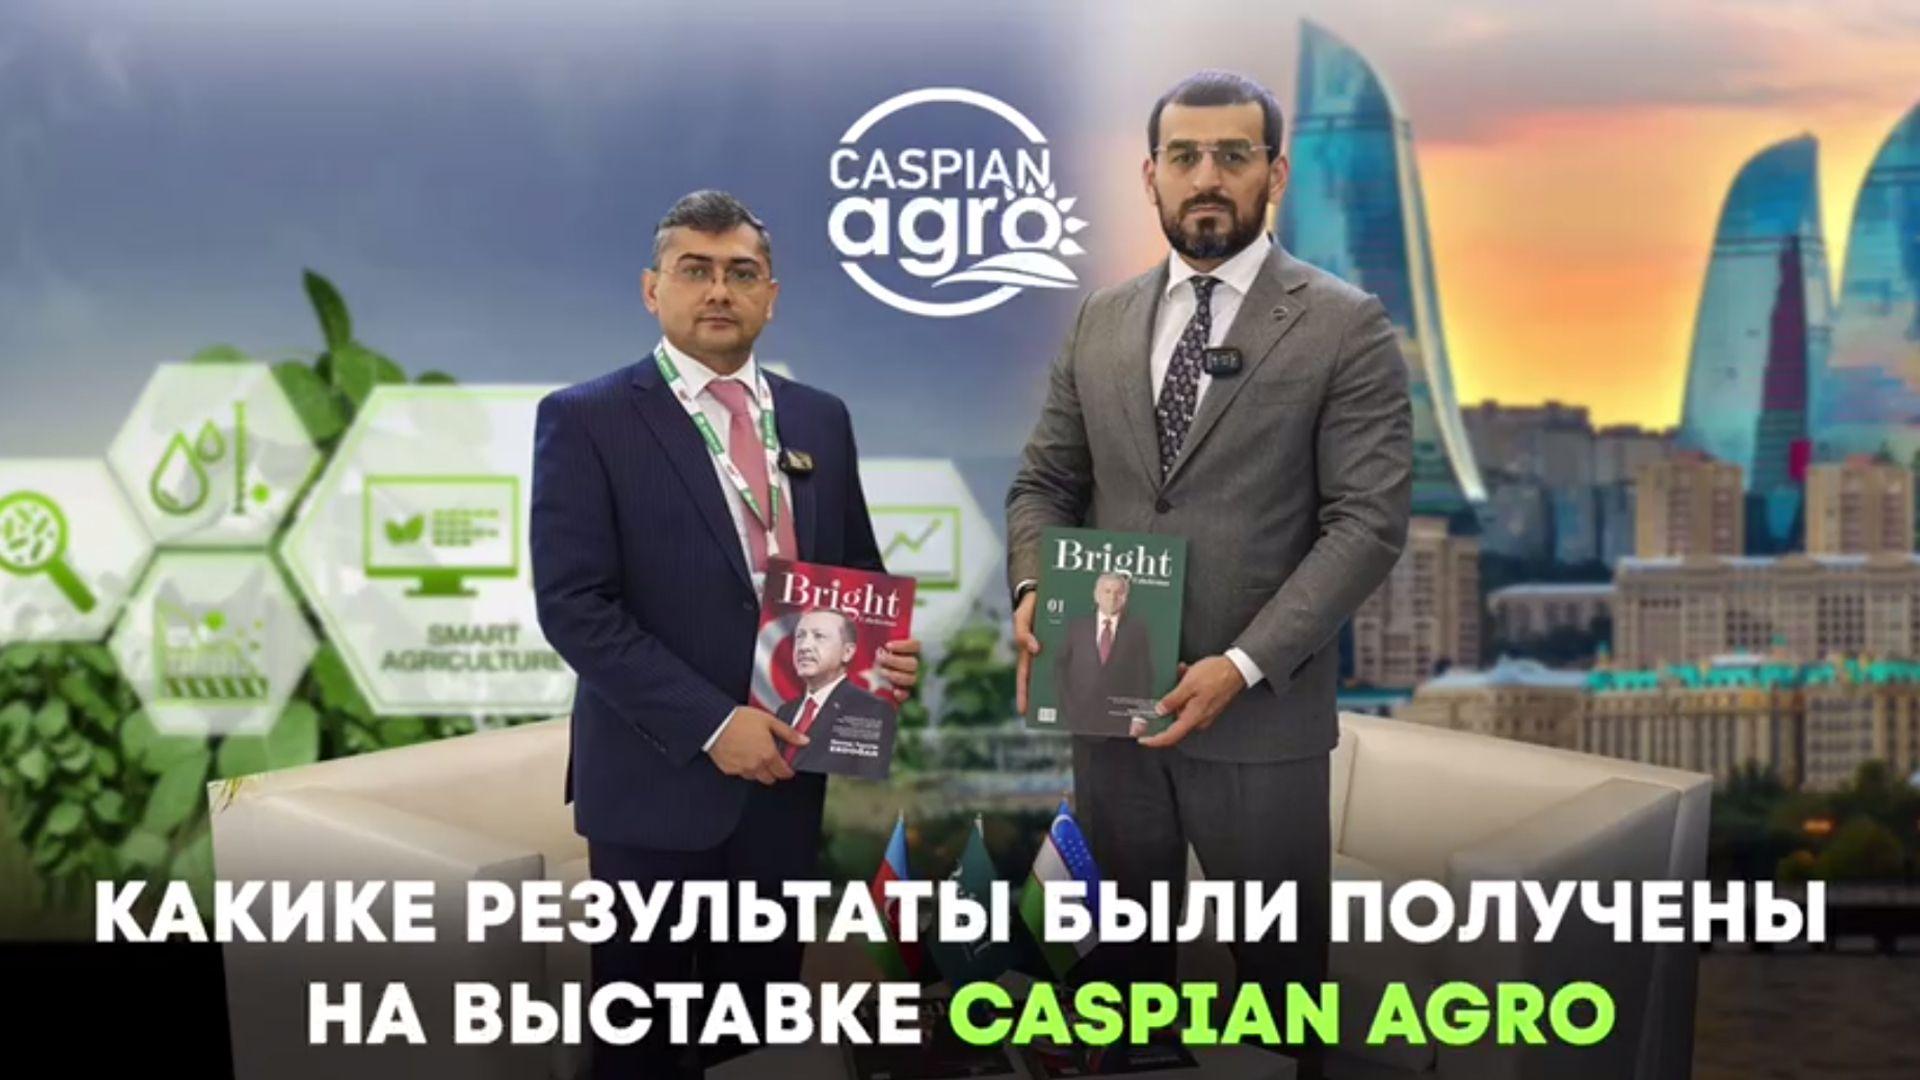 What results were obtained at the Caspian Agro exhibition?